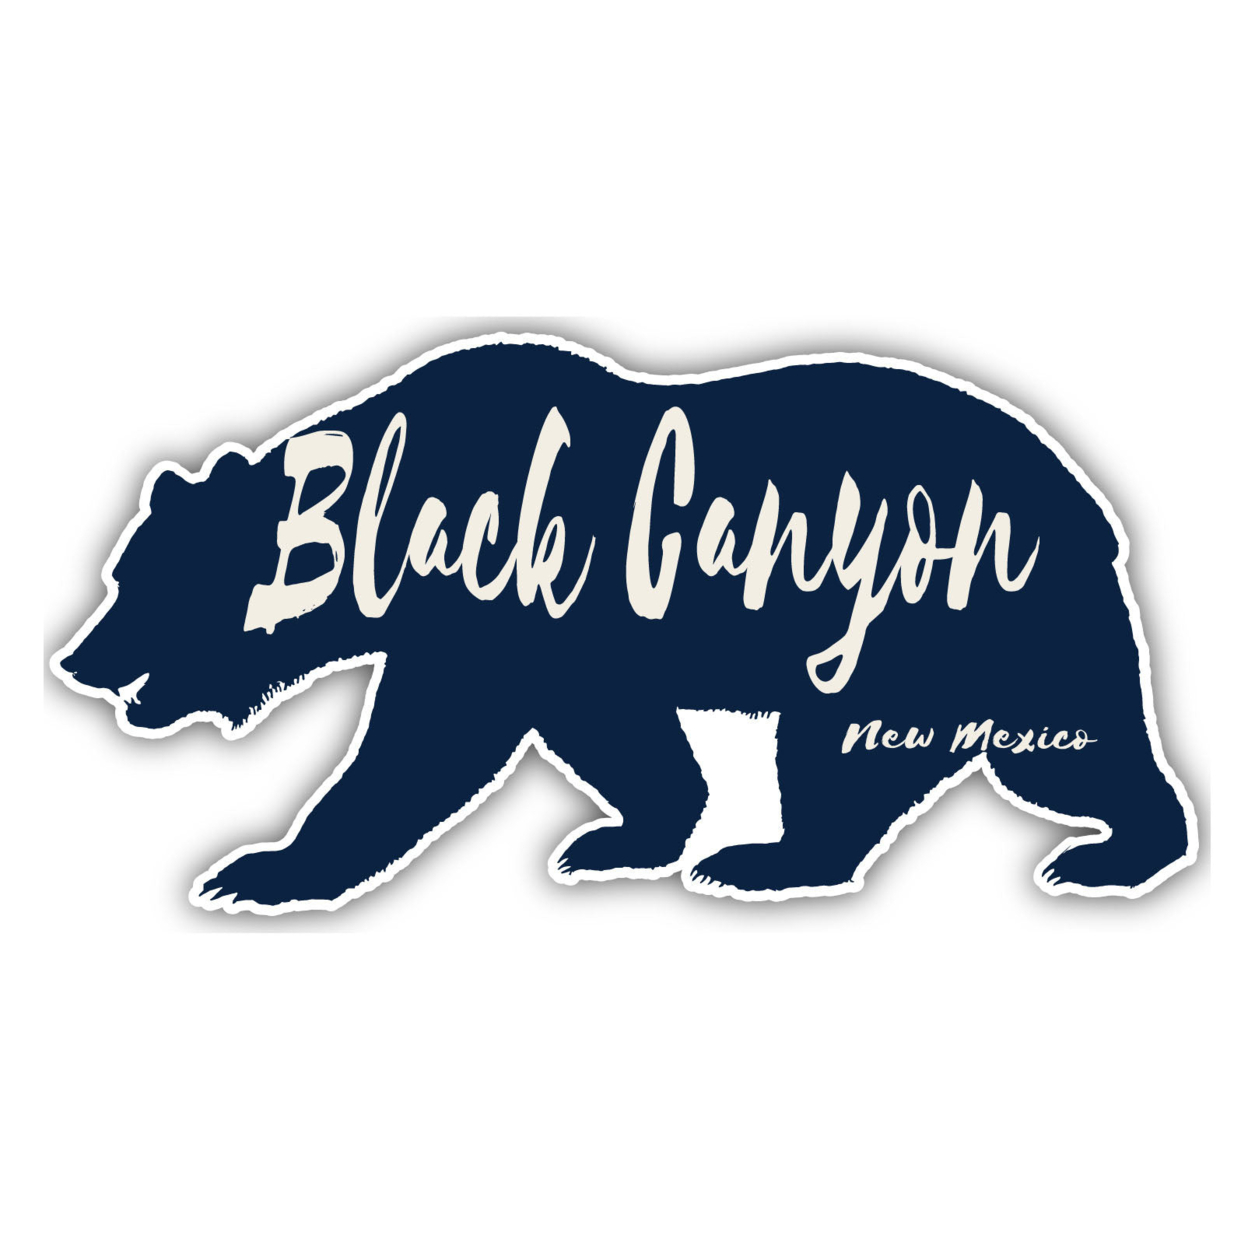 Black Canyon New Mexico Souvenir Decorative Stickers (Choose Theme And Size) - 4-Pack, 2-Inch, Bear